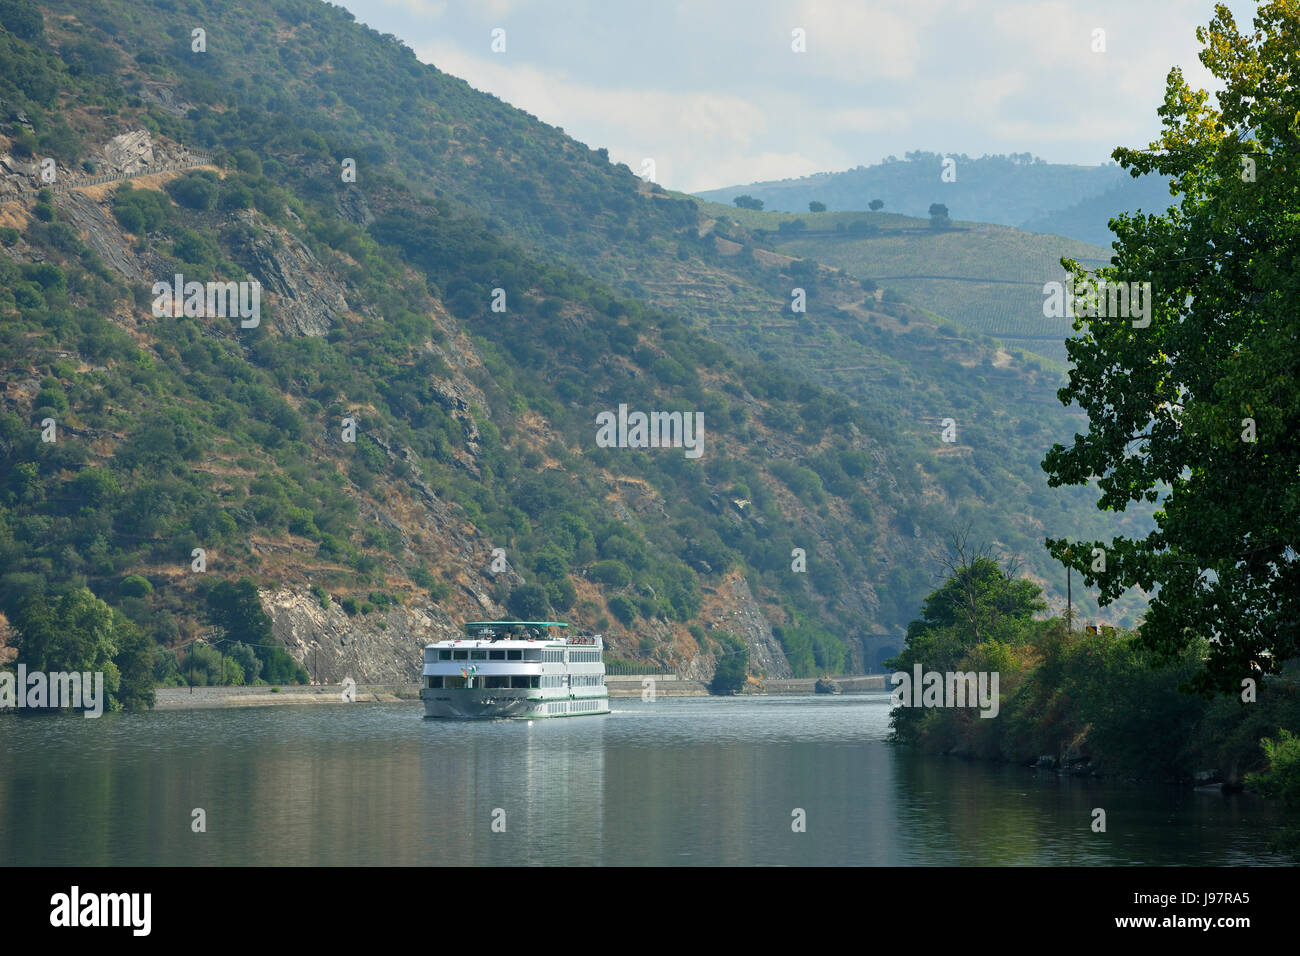 An hotel-ship at the Douro river. Portugal Stock Photo